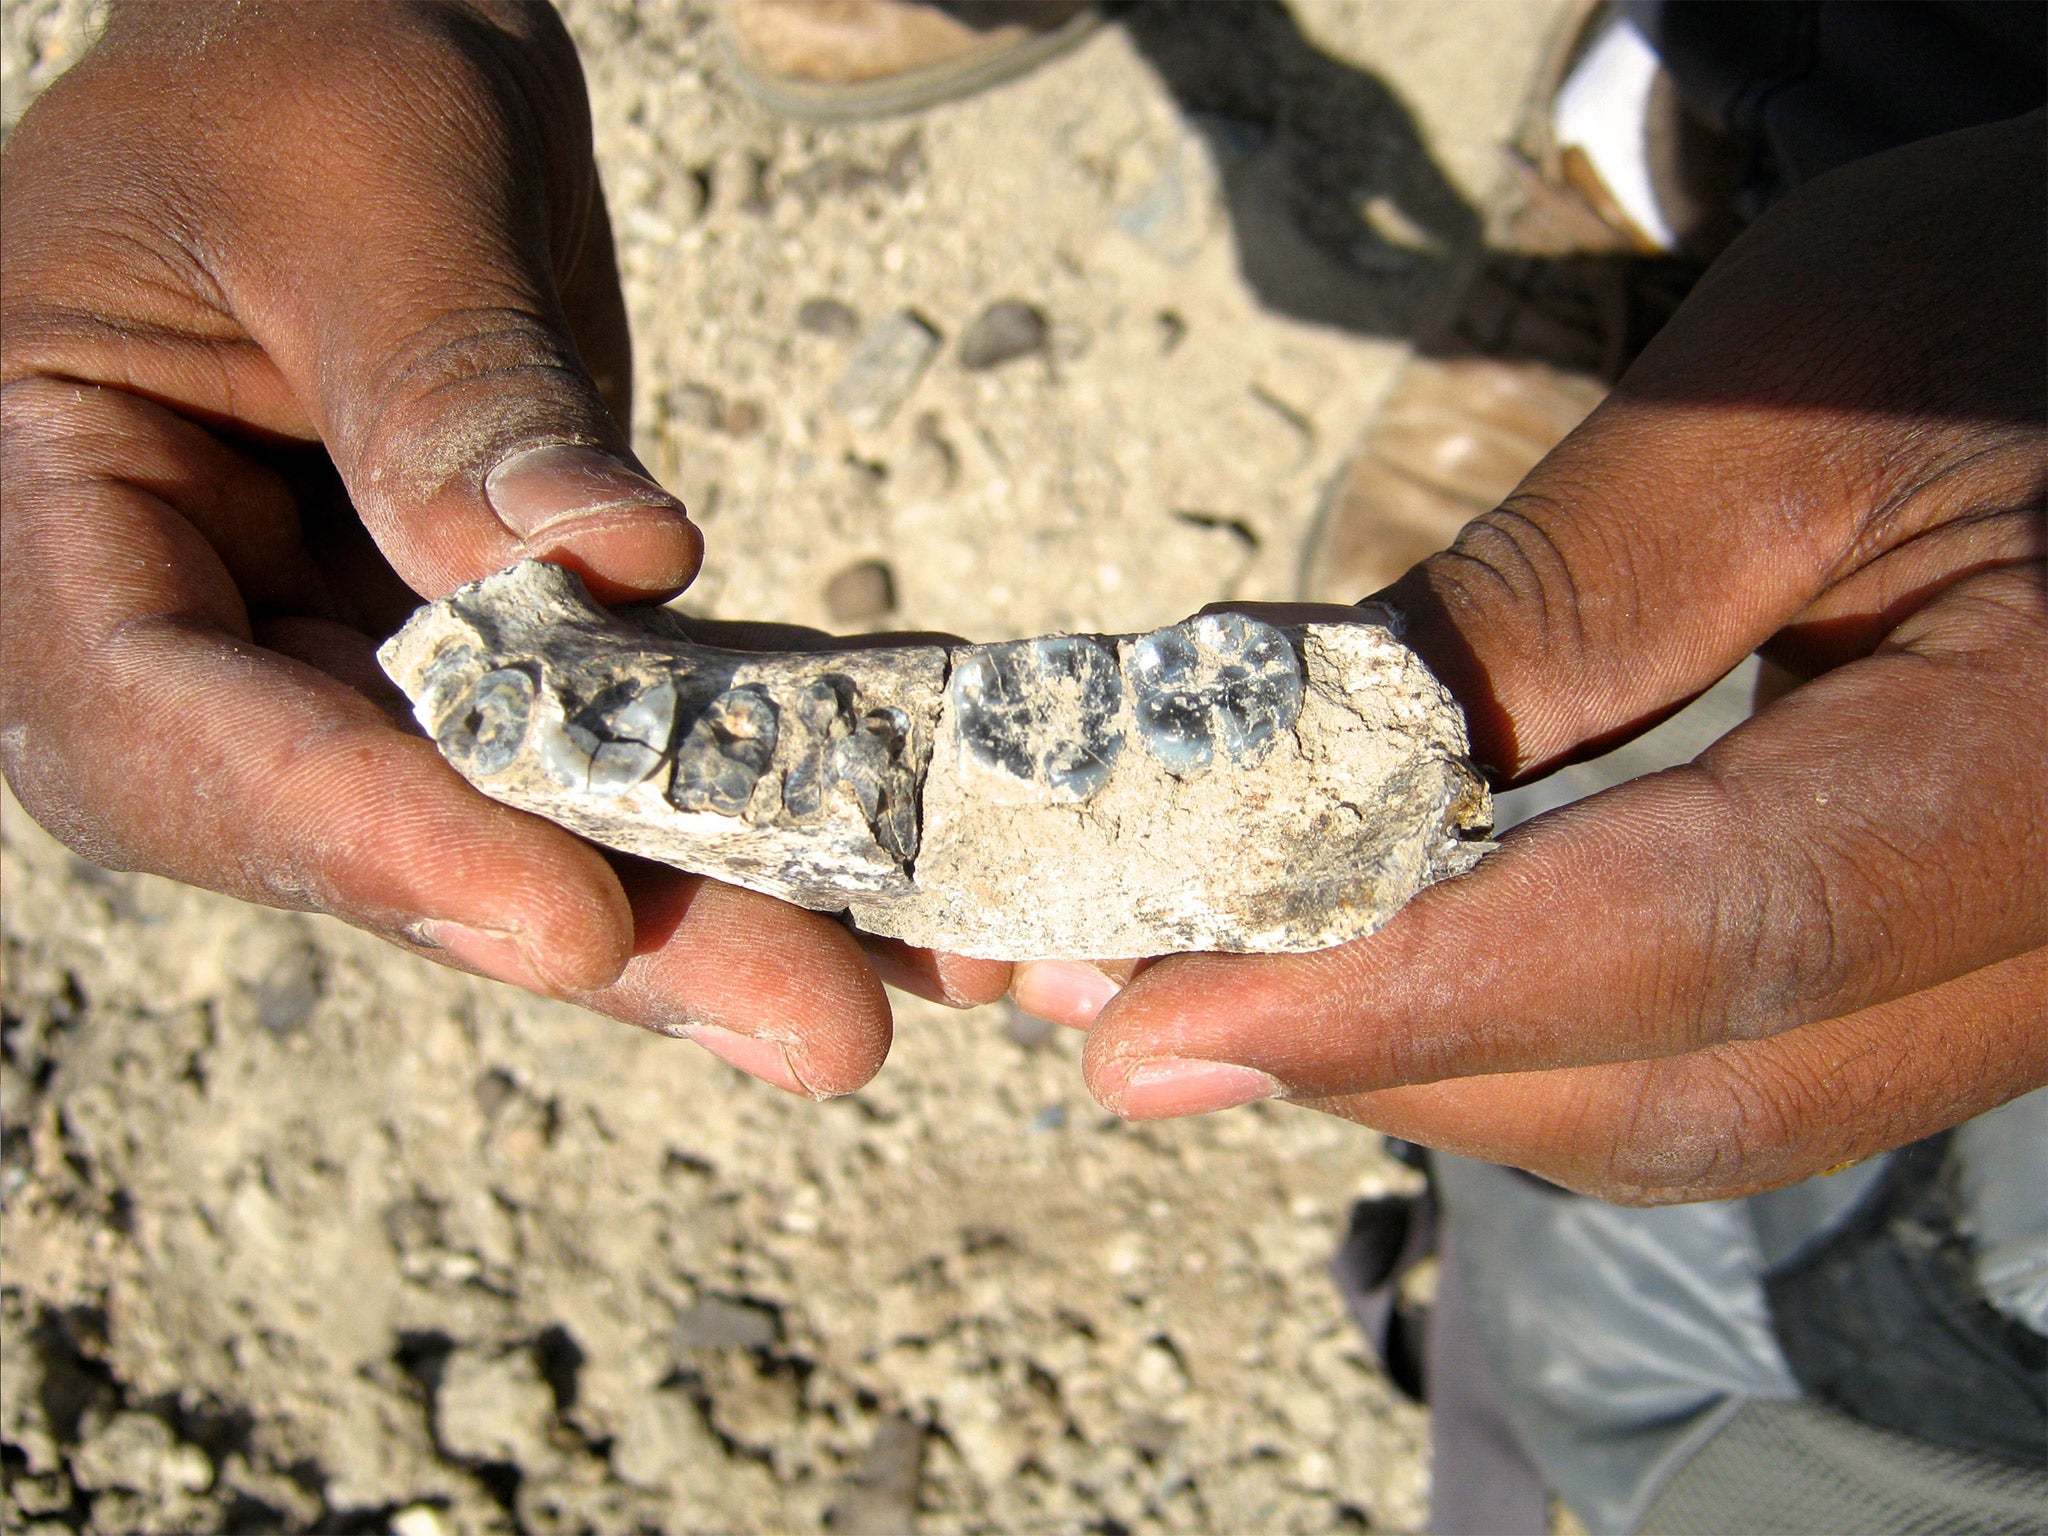 The 2.8 million-year-old human jaw bone fossil found in Ethiopia